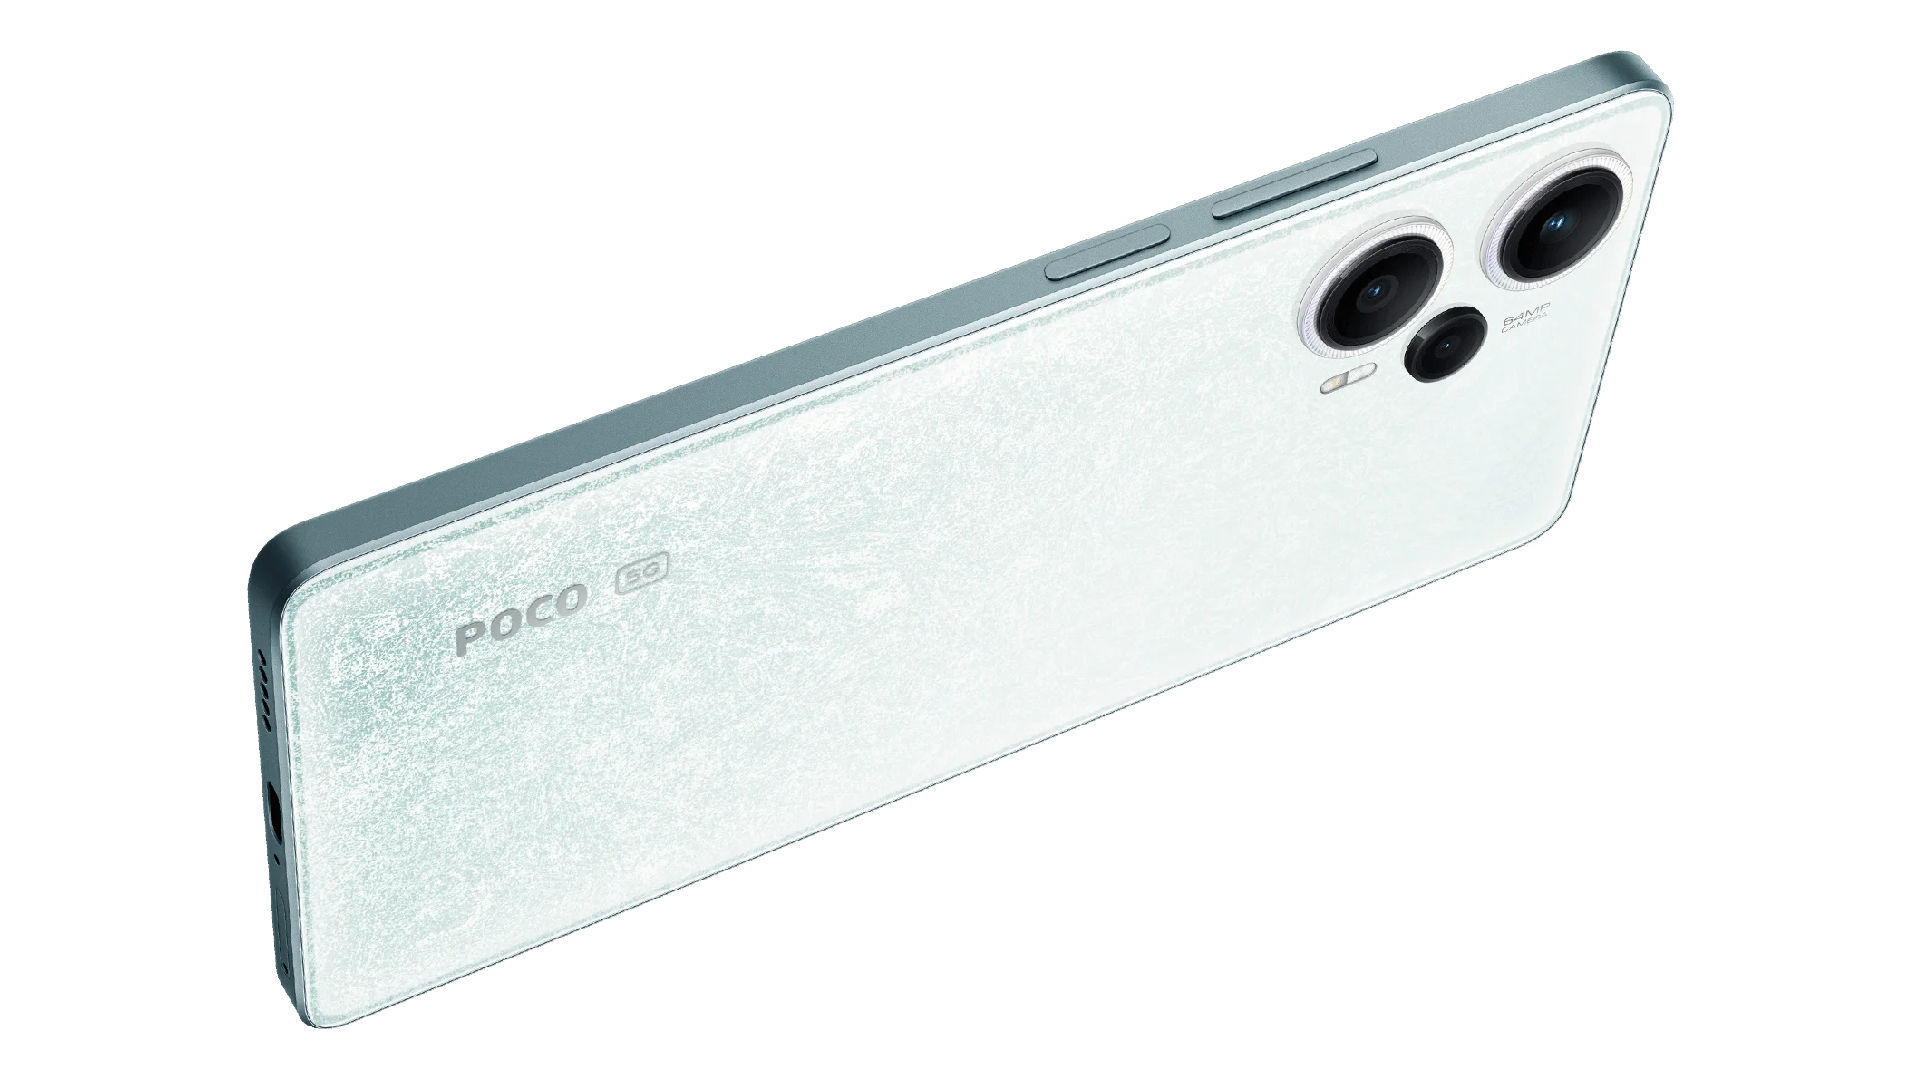 POCO F5 launched in India, POCO F5 Pro announced globally: price,  specifications